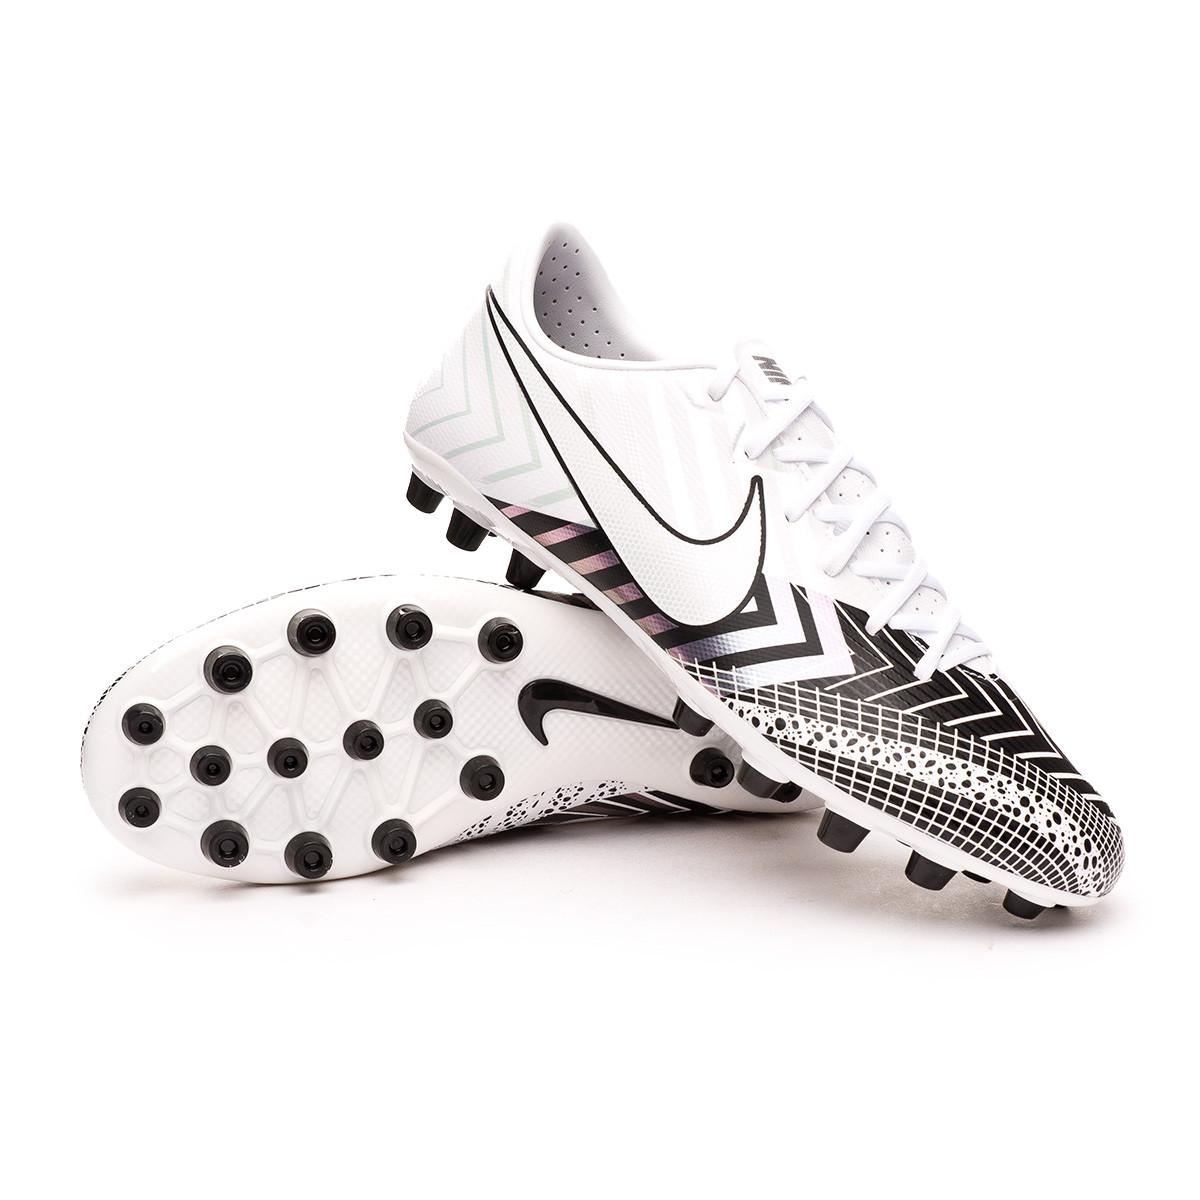 nike black and white football boots